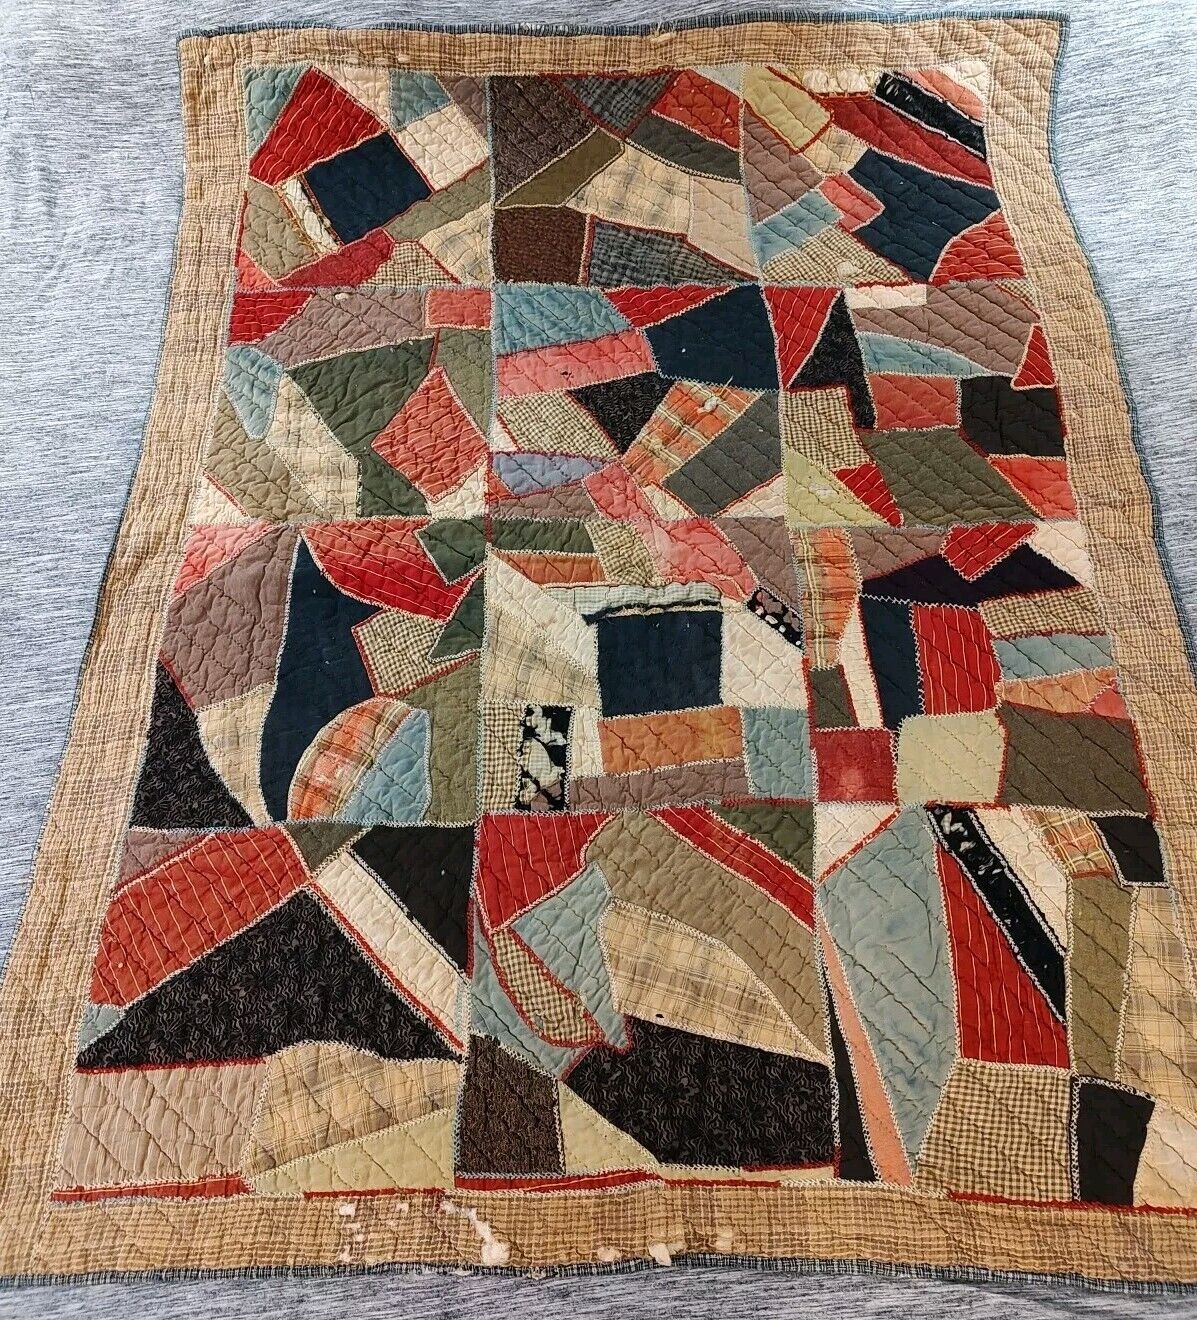 Vintage Antique 1800s Hand Stitched Patchwork Quilt-in-a-quilt Wool Cotton 65X51